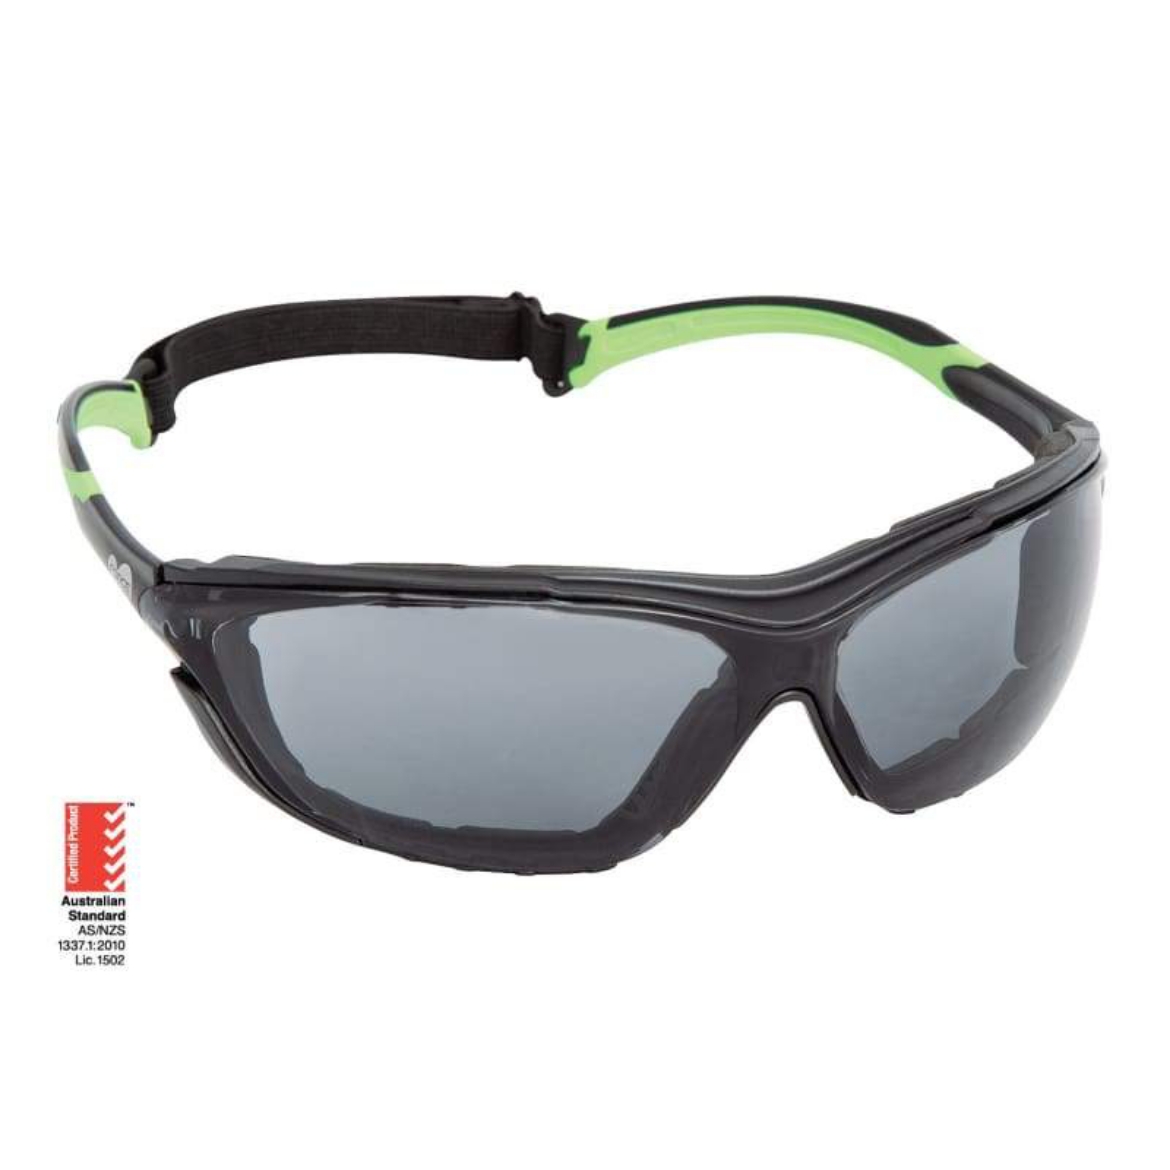 Picture of Force360 NeoGuard Smoke Lens Safety Glasses with Gasket